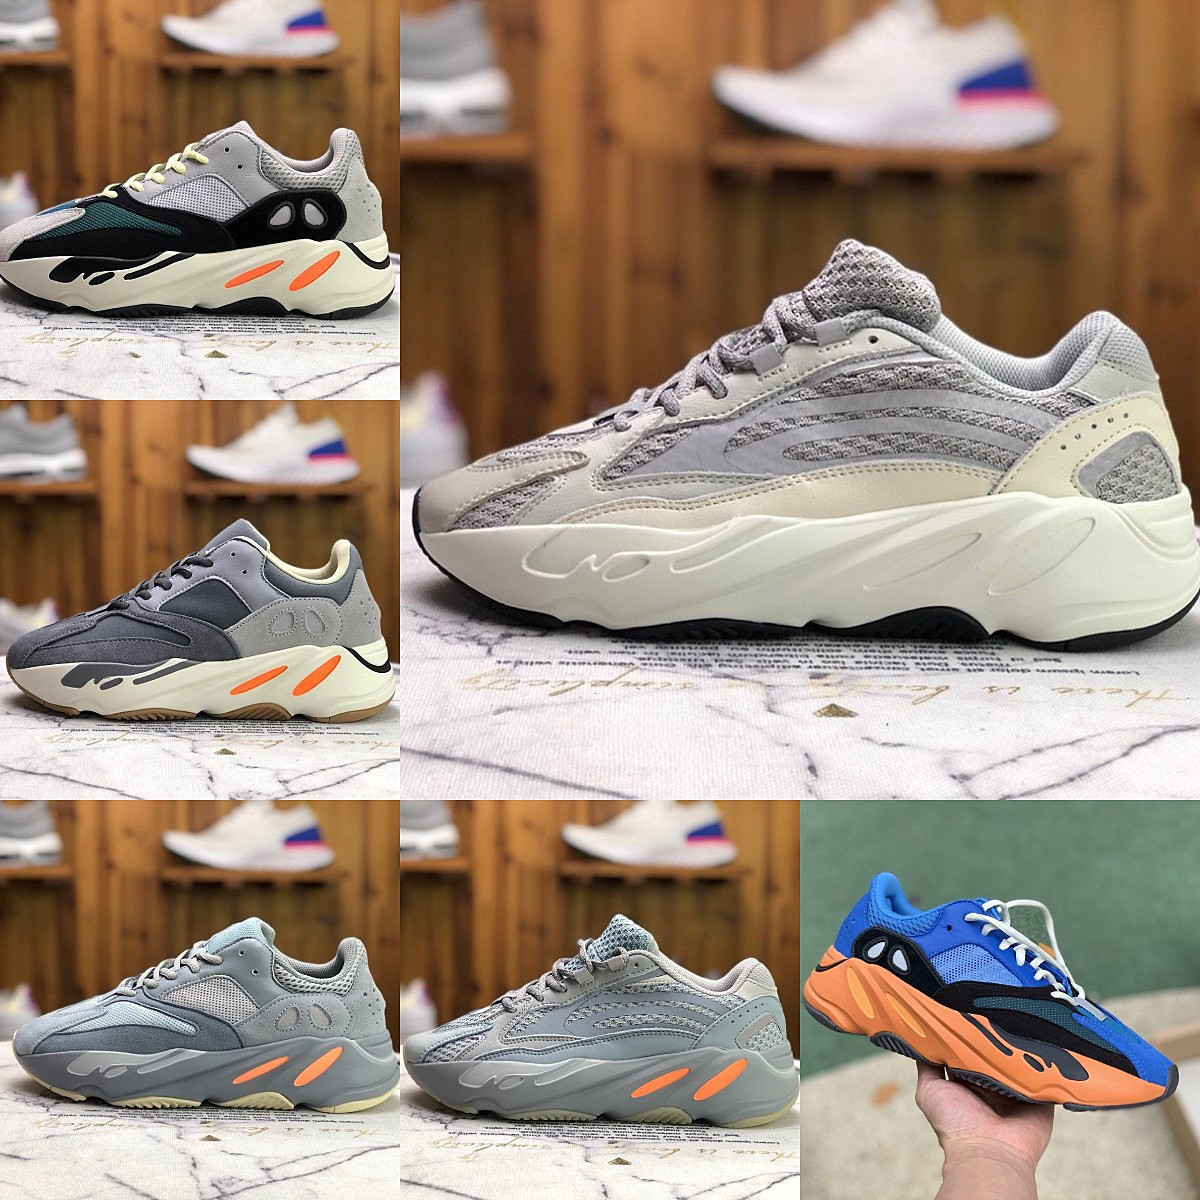 

Designers Enflame Amber 700 V2 Men Women Sports Shoes Runner Sea Bright Blue 700S Geode Inertia Alvah Azael Static Magnet Wave Solid Grey Tephra Trainer Sneakers S18, Please contact us